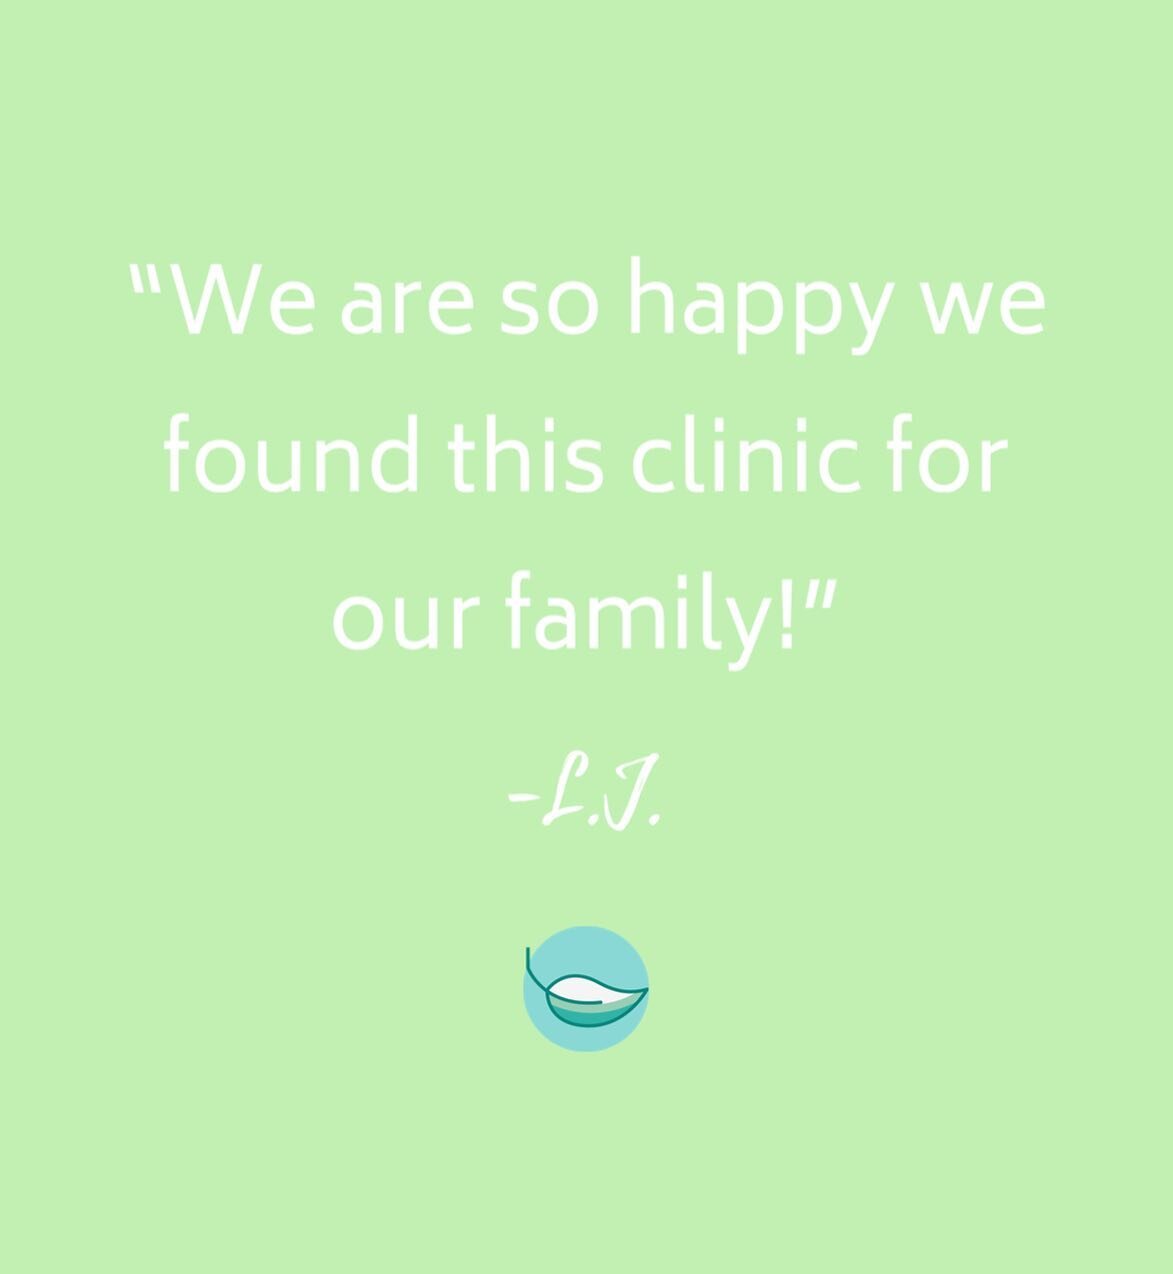 &ldquo;Joanna is professional, experienced and so kind. I take my young daughters to see her and find her calm &amp; friendly manner and trustworthy advice so valuable in making my children feel comfortable with dental cleanings. She really takes the